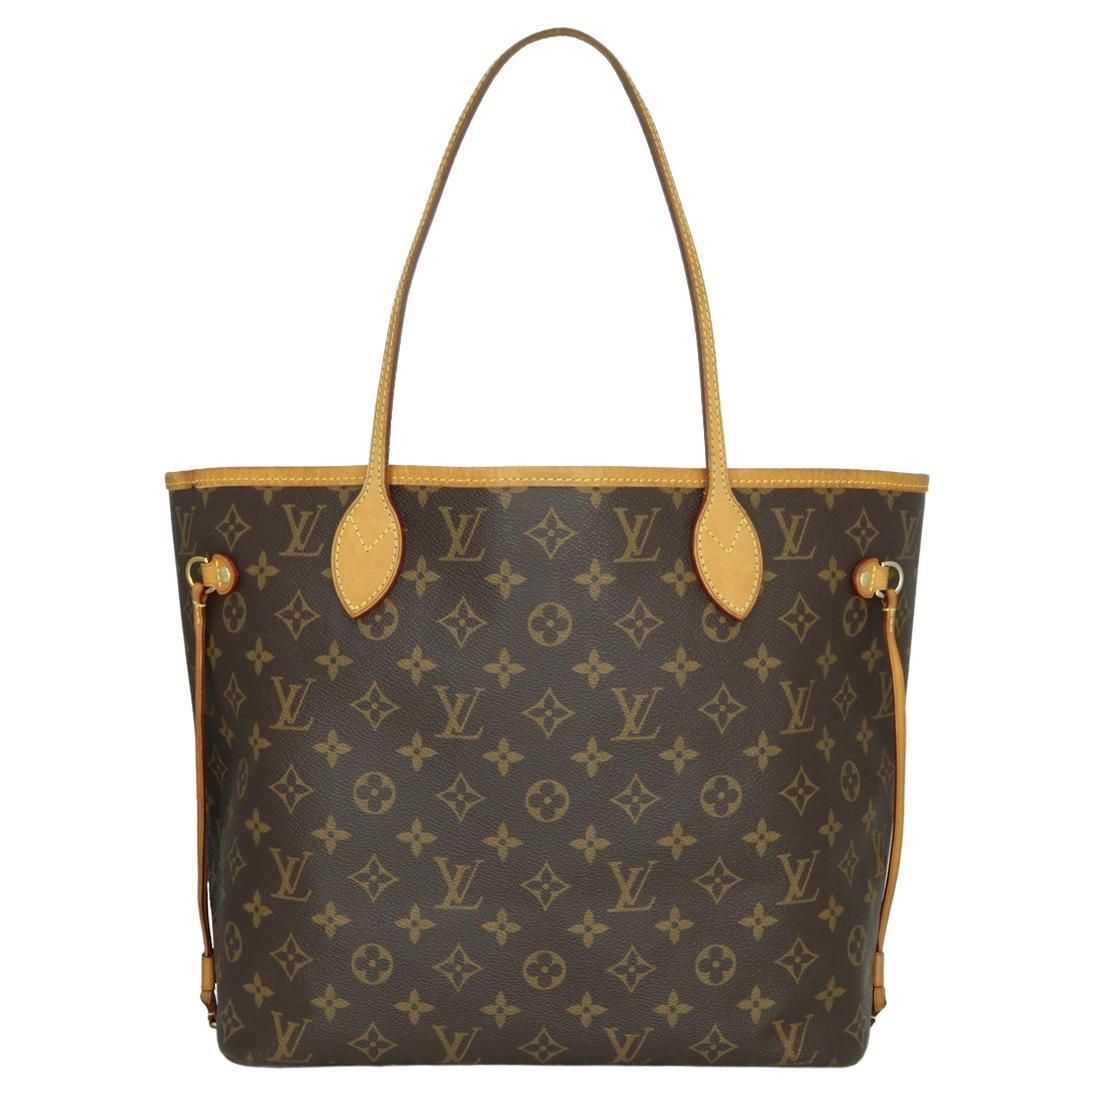 LOUIS VUITTON Paper Shopping Bag 13 x 16 x 6 inches - 10/10 Condition